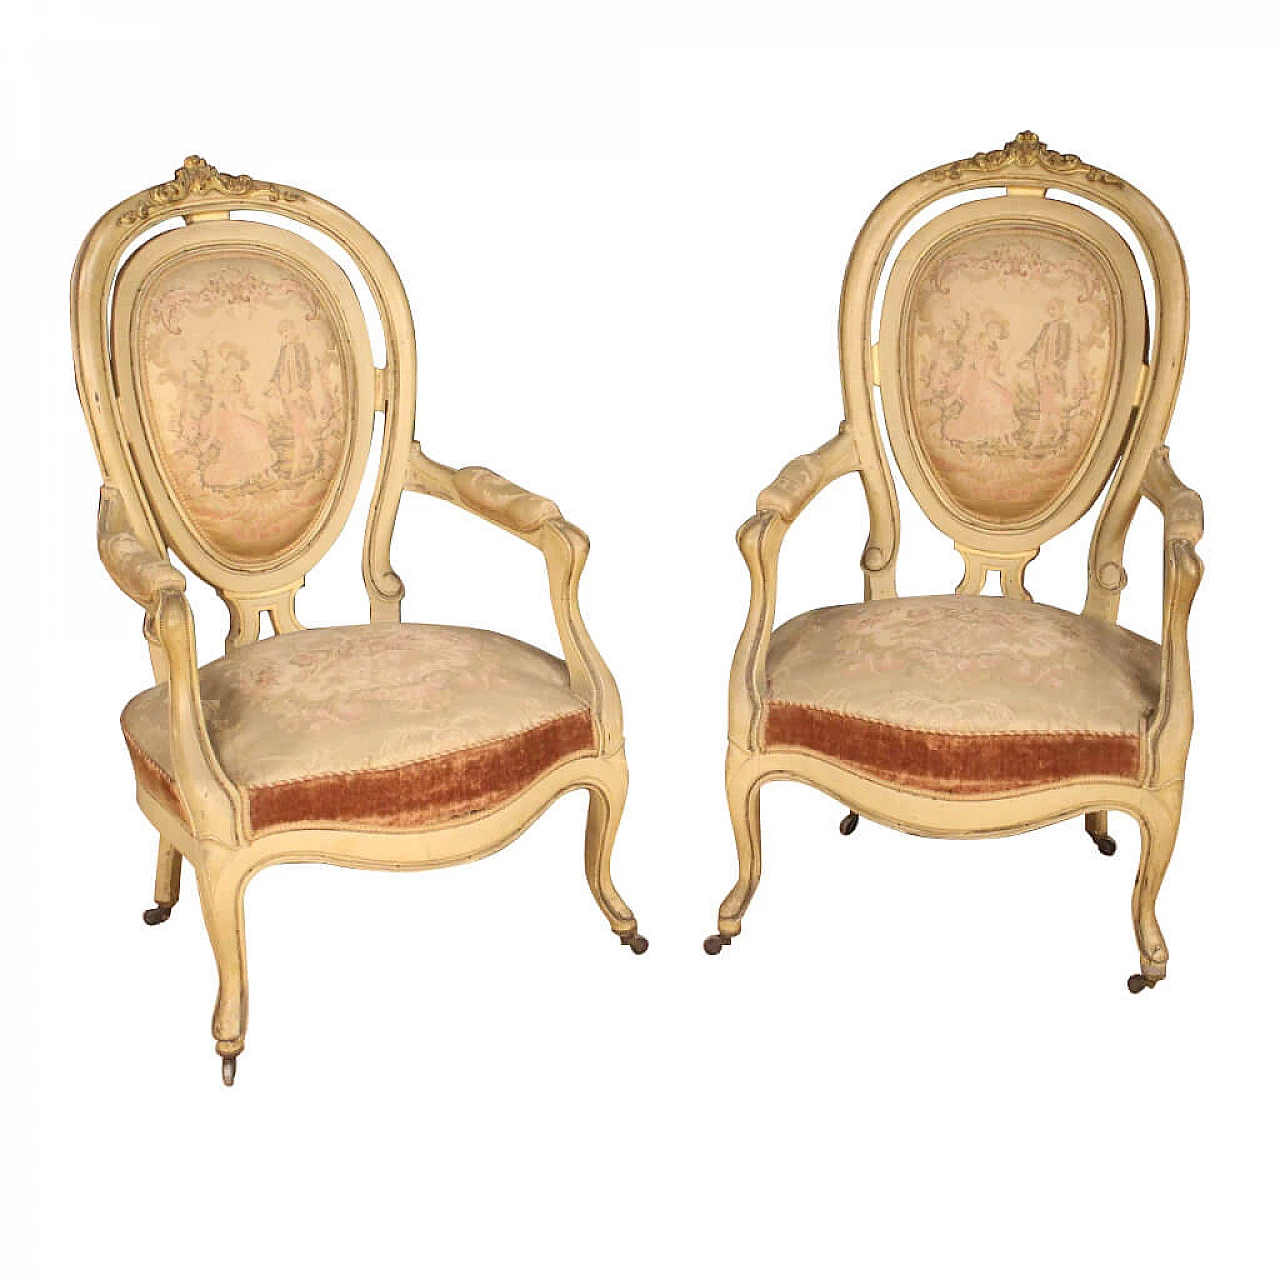 Pair of antique lacquered and gilded French armchairs from the 19th century 1086711